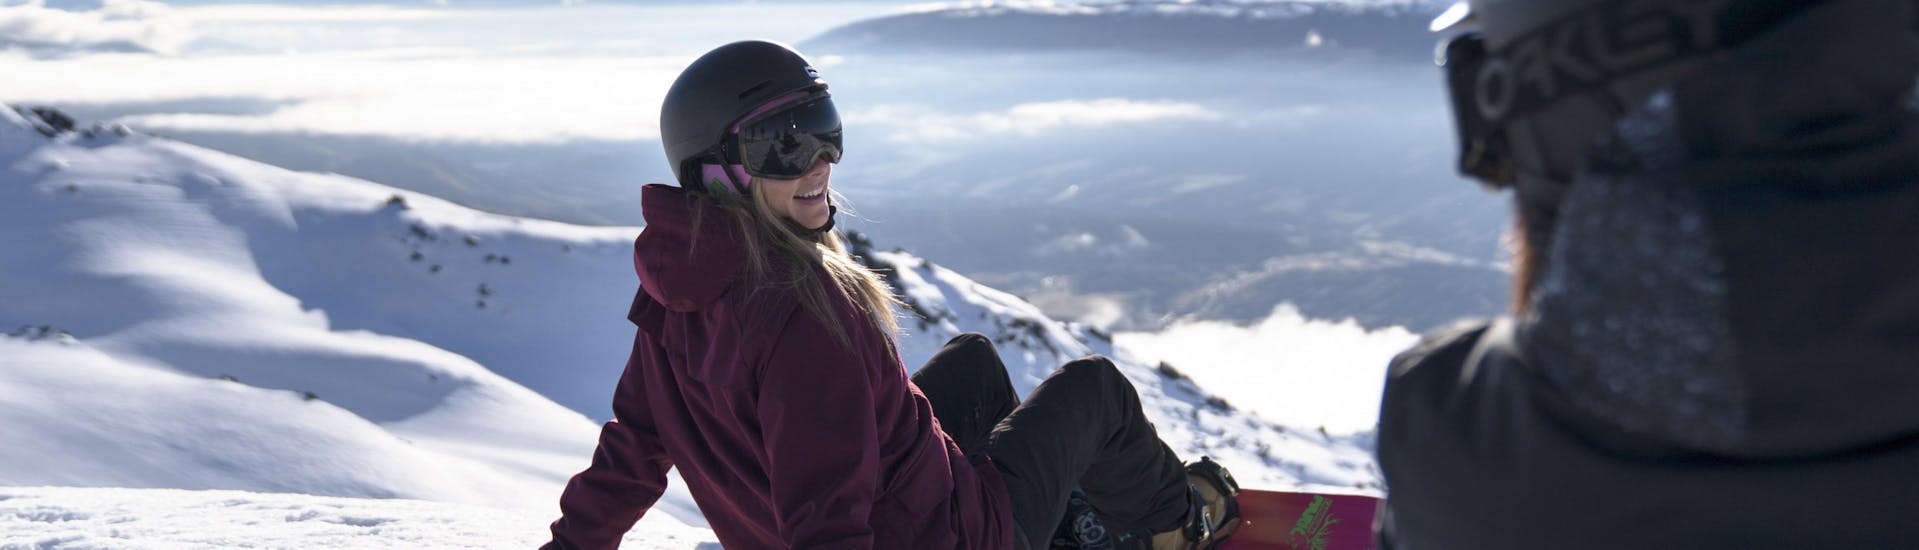 Snowboarding Lessons for Adults - First Timer Package.